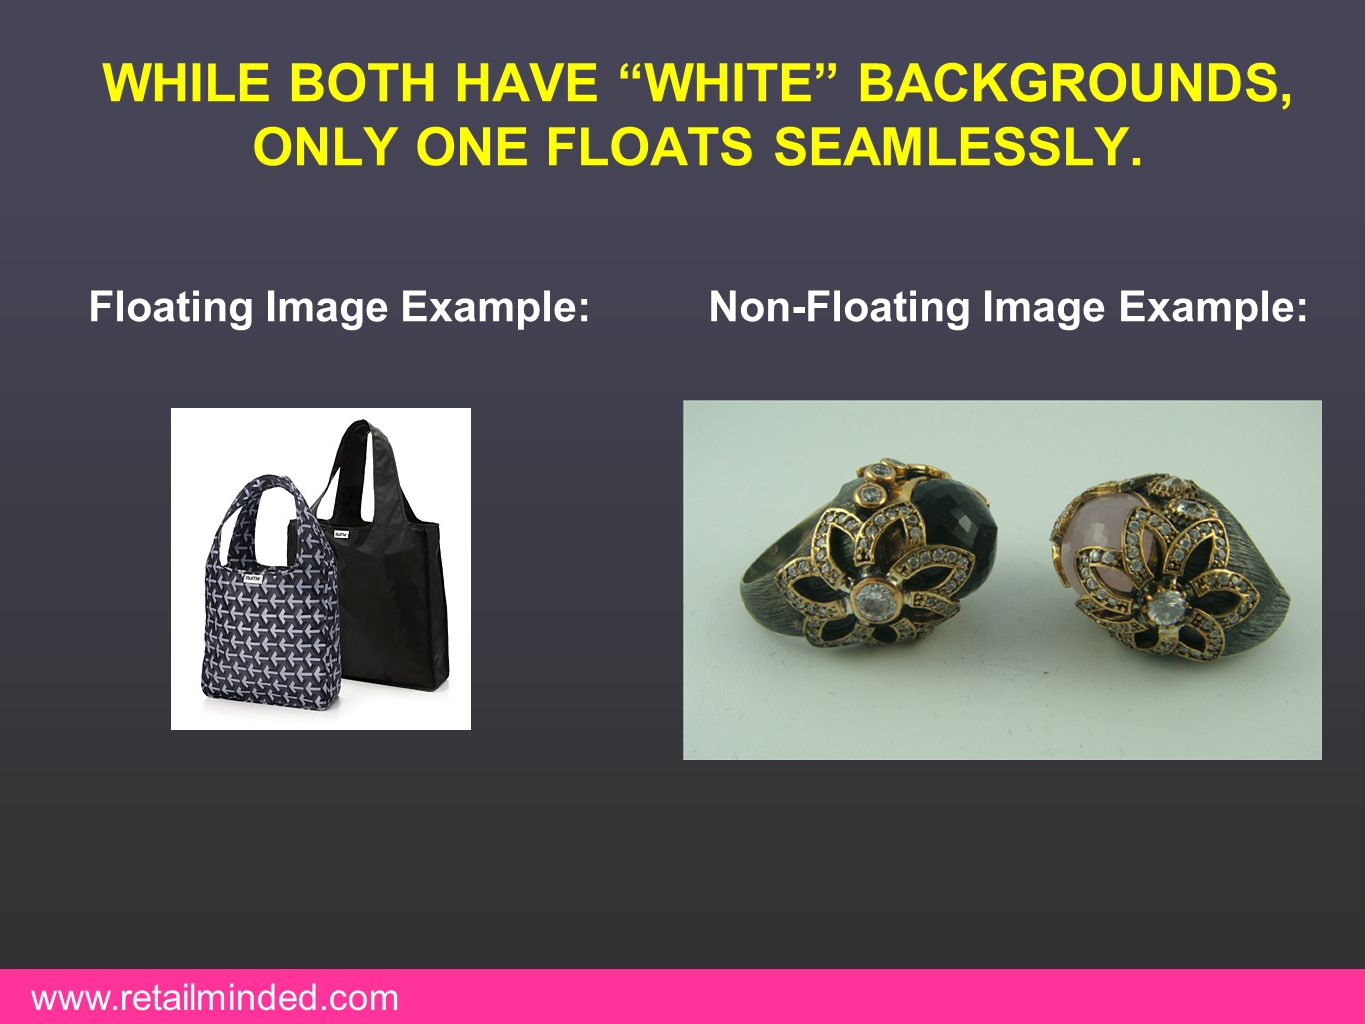 WHILE BOTH HAVE WHITE BACKGROUNDS, ONLY ONE FLOATS SEAMLESSLY